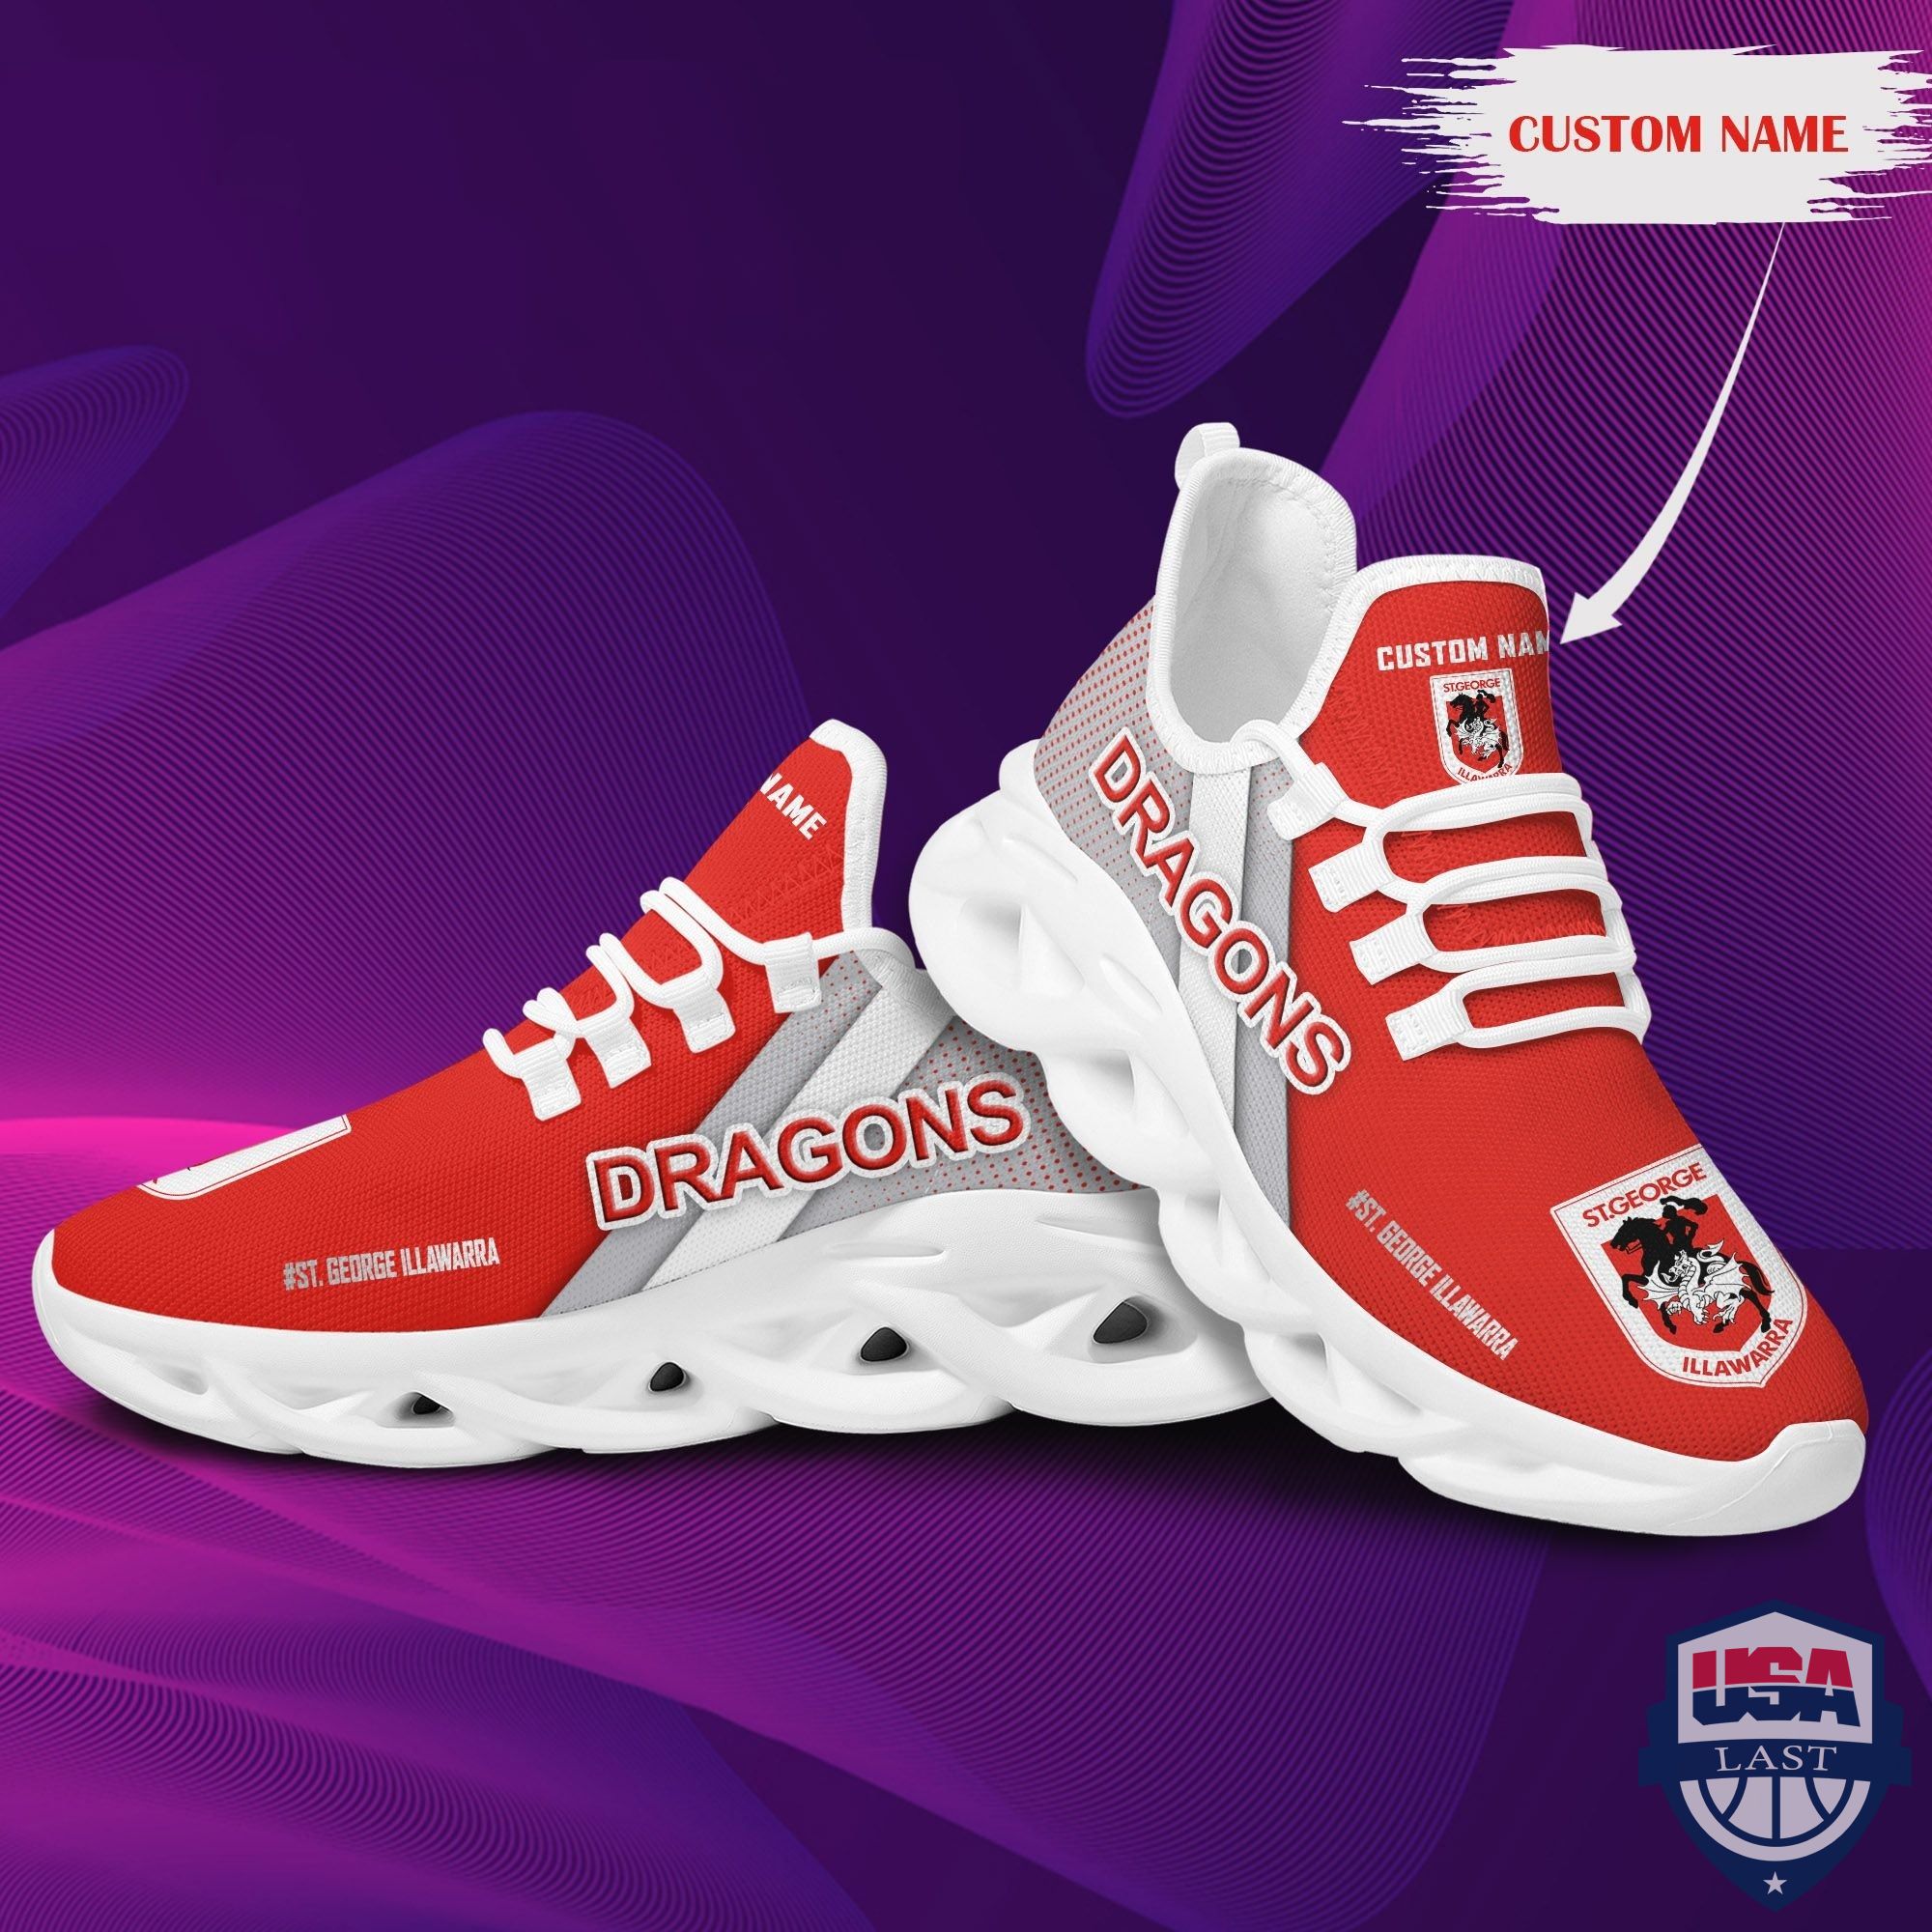 Personalized St George Illawarra Dragons Max Soul Shoes